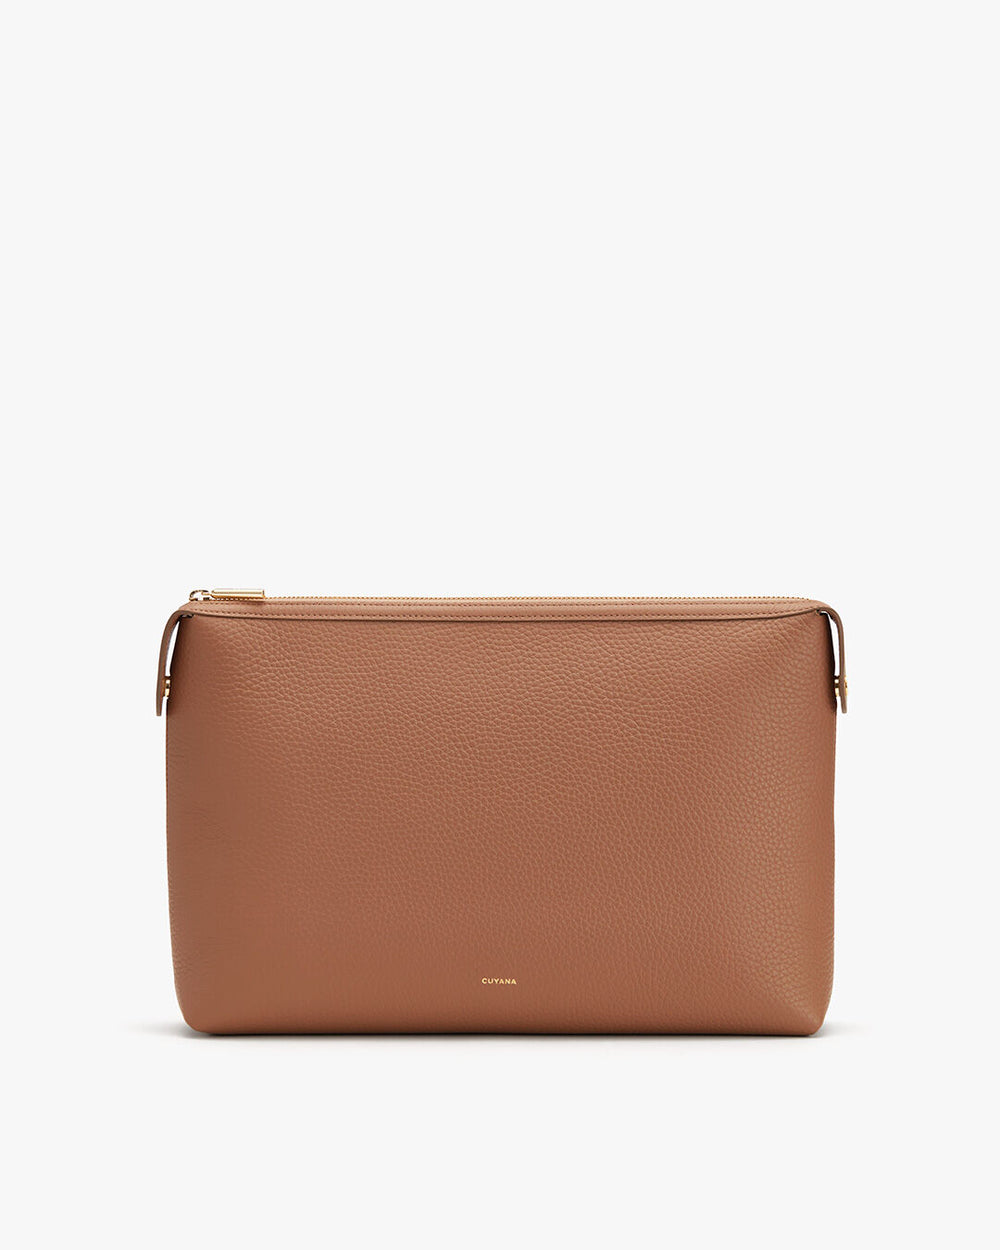 Leather clutch bag with a zipper on a plain background.